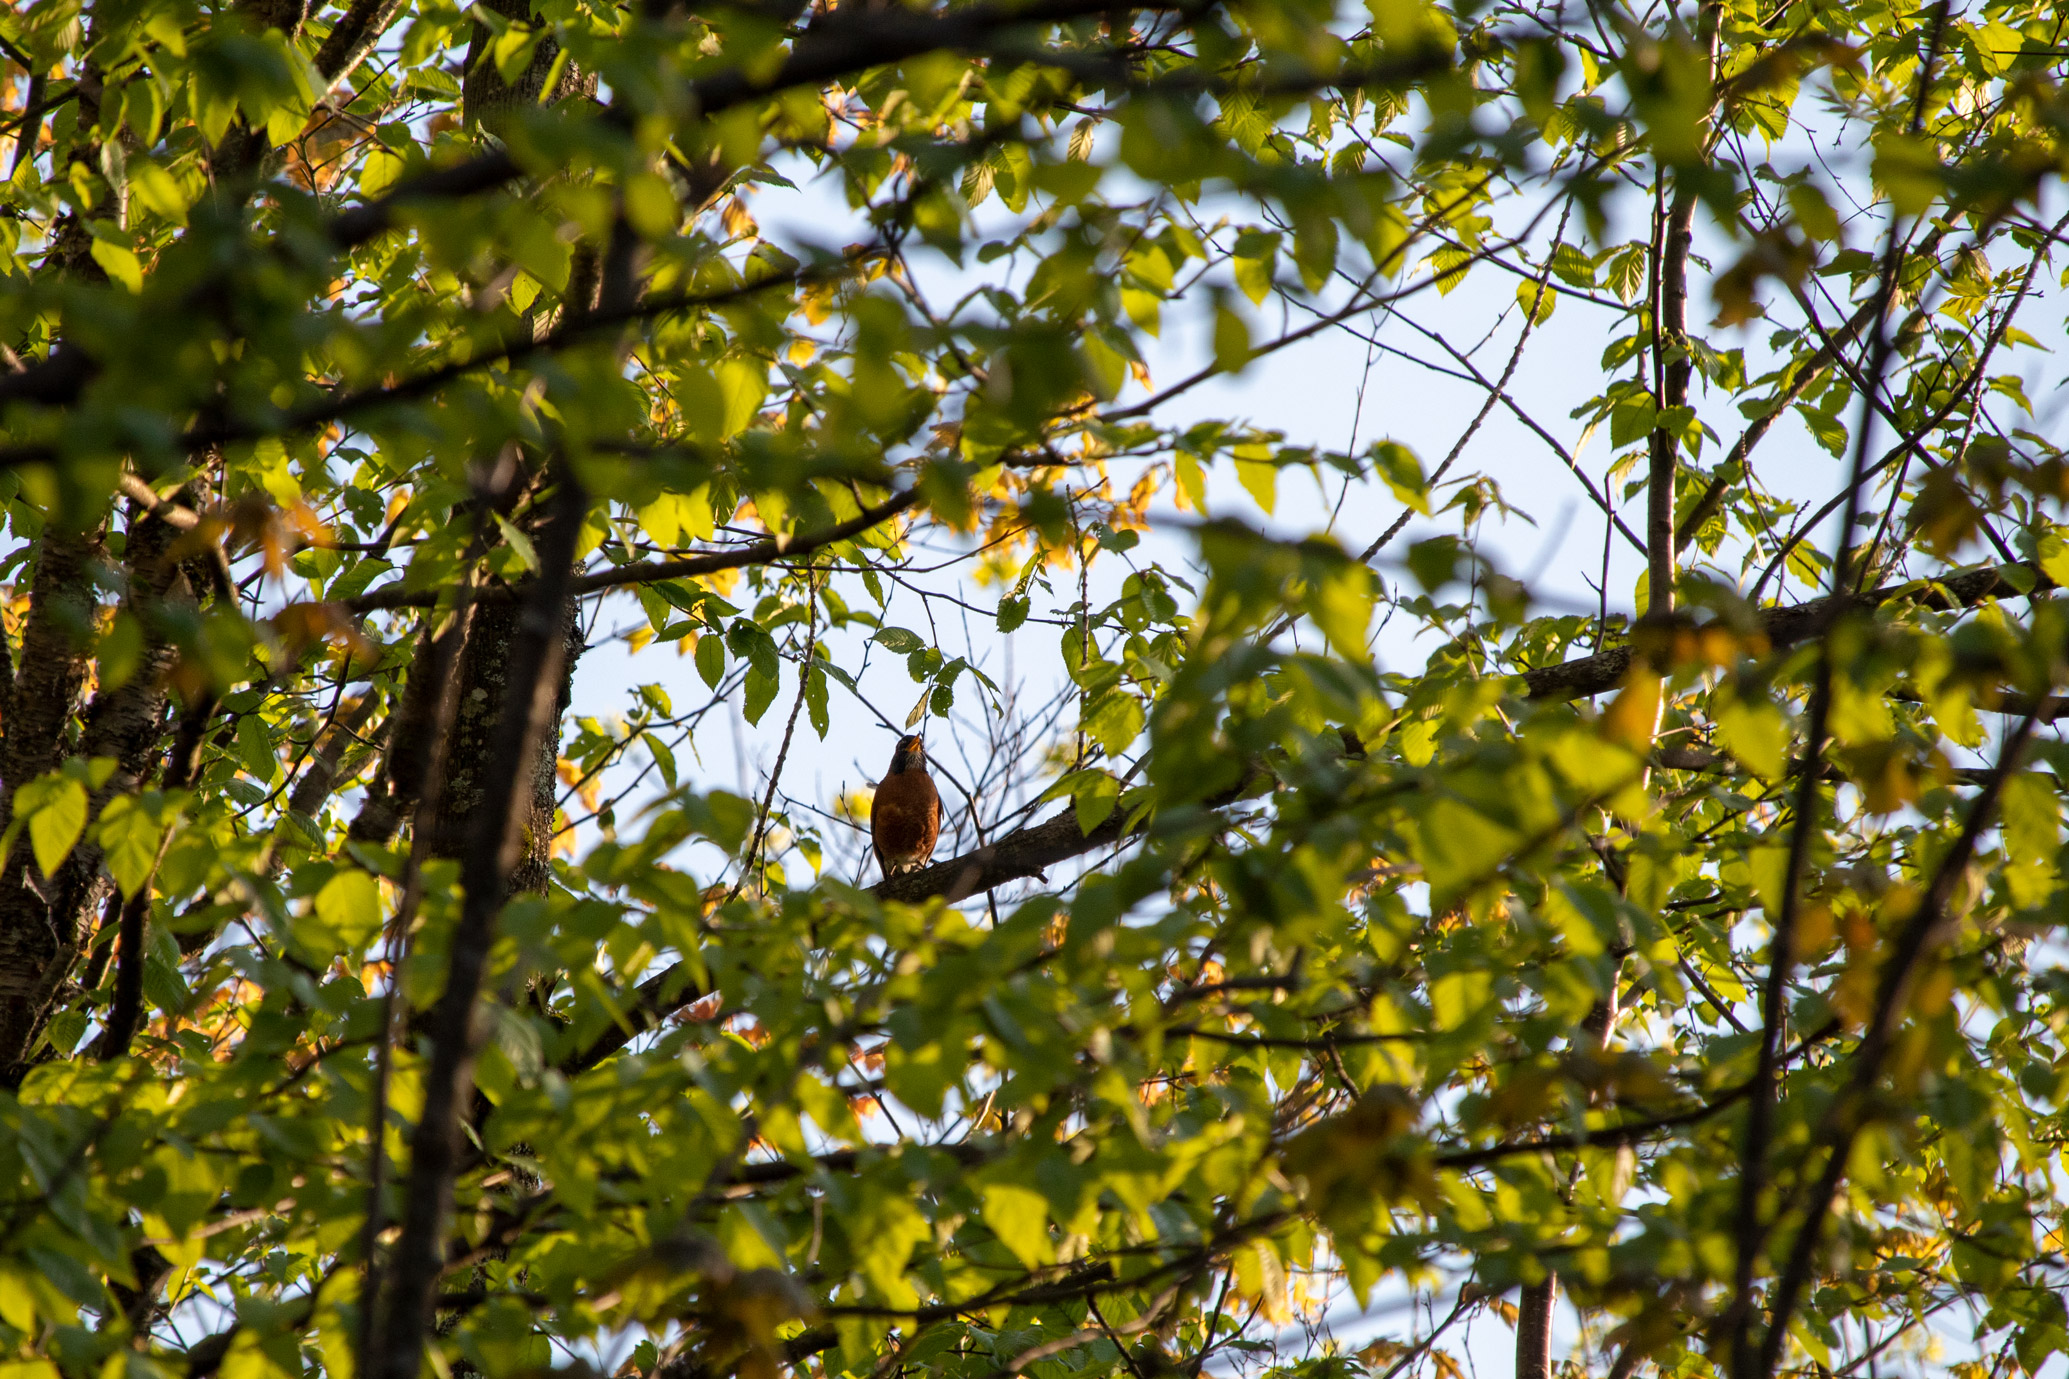 Orange and grey bird singing on a branch, surrounded by green leaves